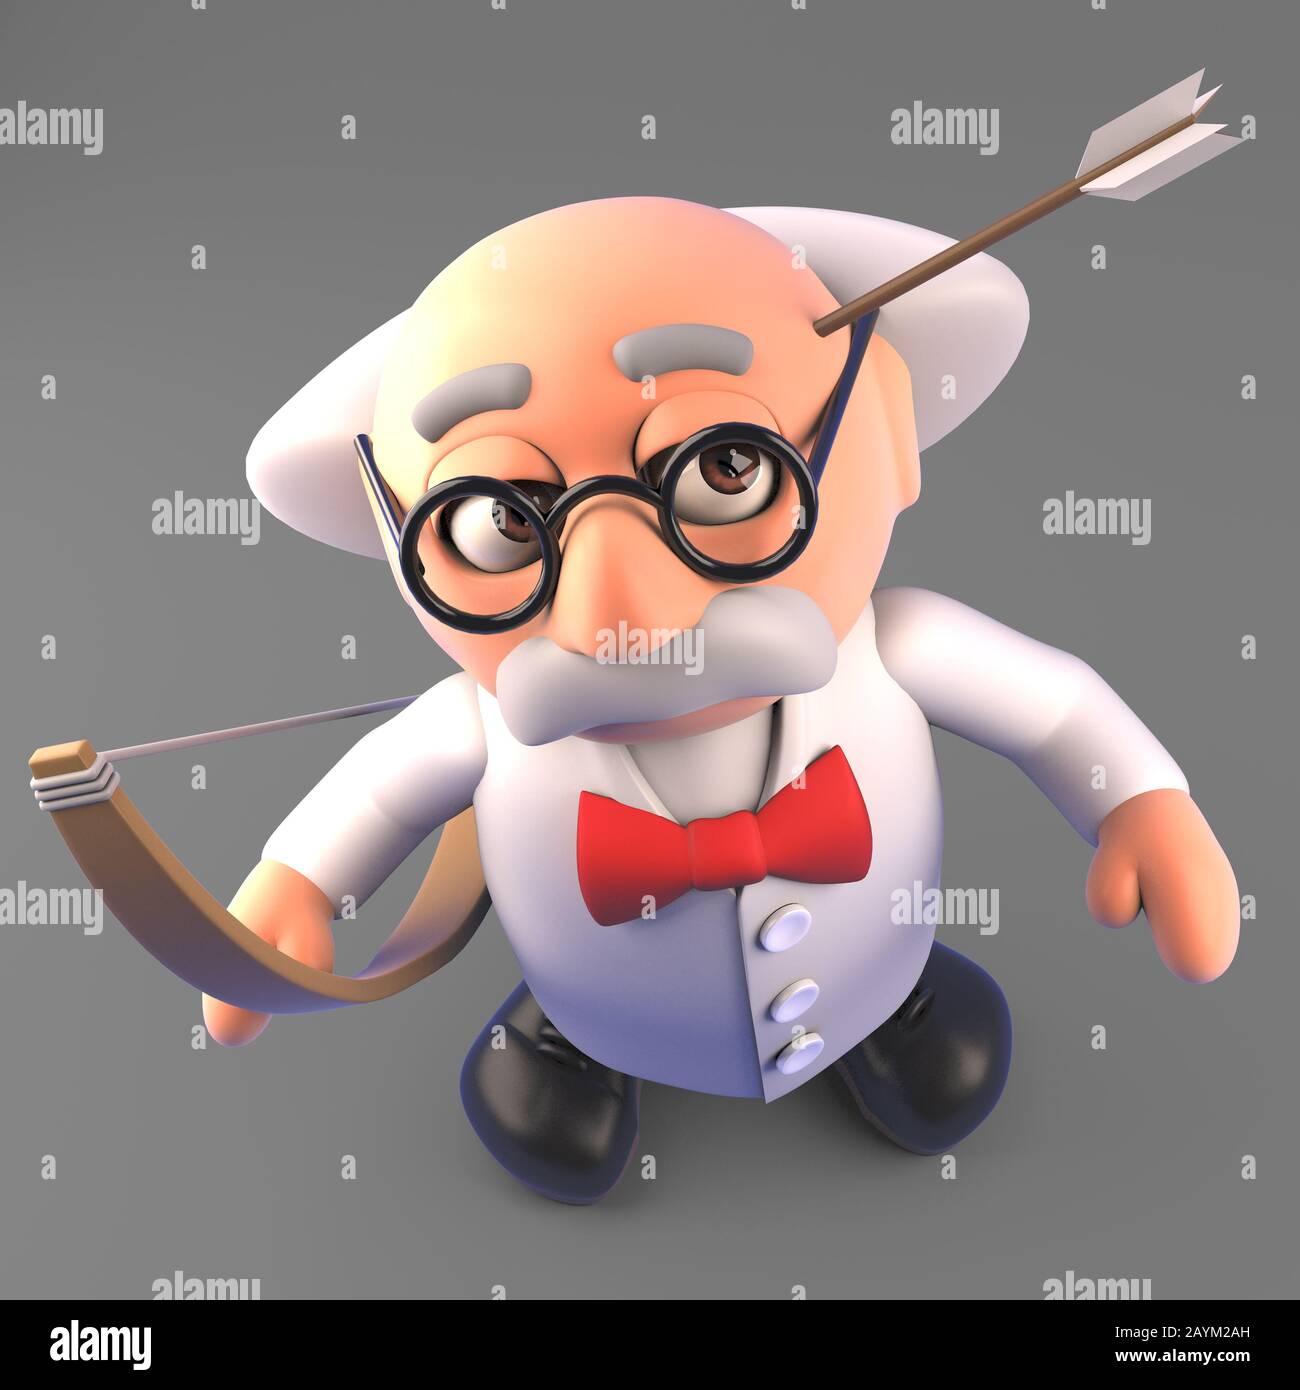 Mad scientist has a flesh wound inflicted by an arrow, 3d illustration render Stock Photo